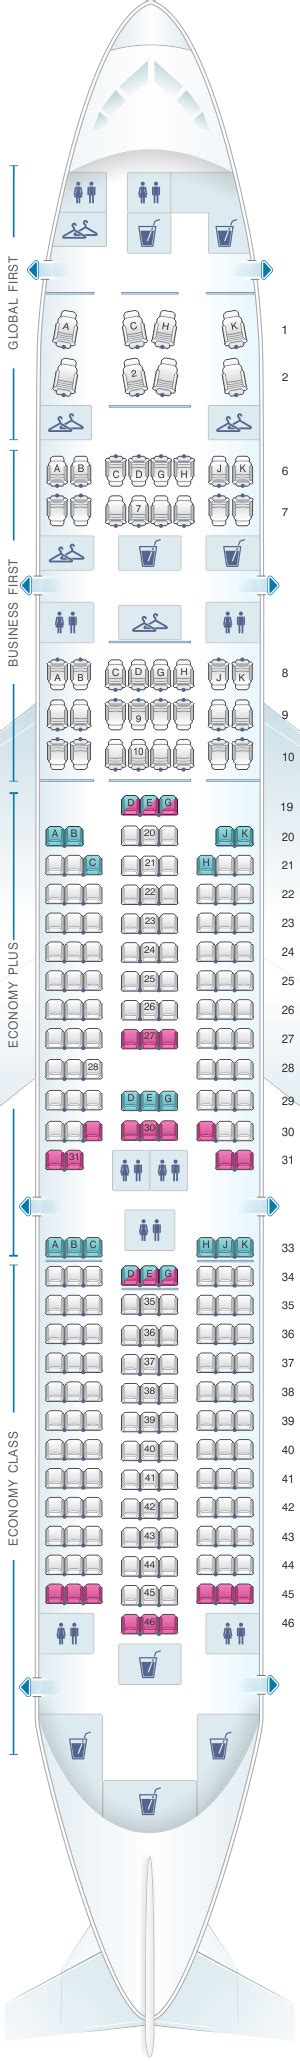 The seat map reflects the United Airlines 757-200 used on long-haul intercontinental routes. This configuration features Polaris flat bed seats, Economy Plus, and Economy seats. Polaris class on this aircraft features a standard Business Class seat which transforms into a fully flat bed. Polaris inflight service is offered. ... Unlike on the 777-200 …. 